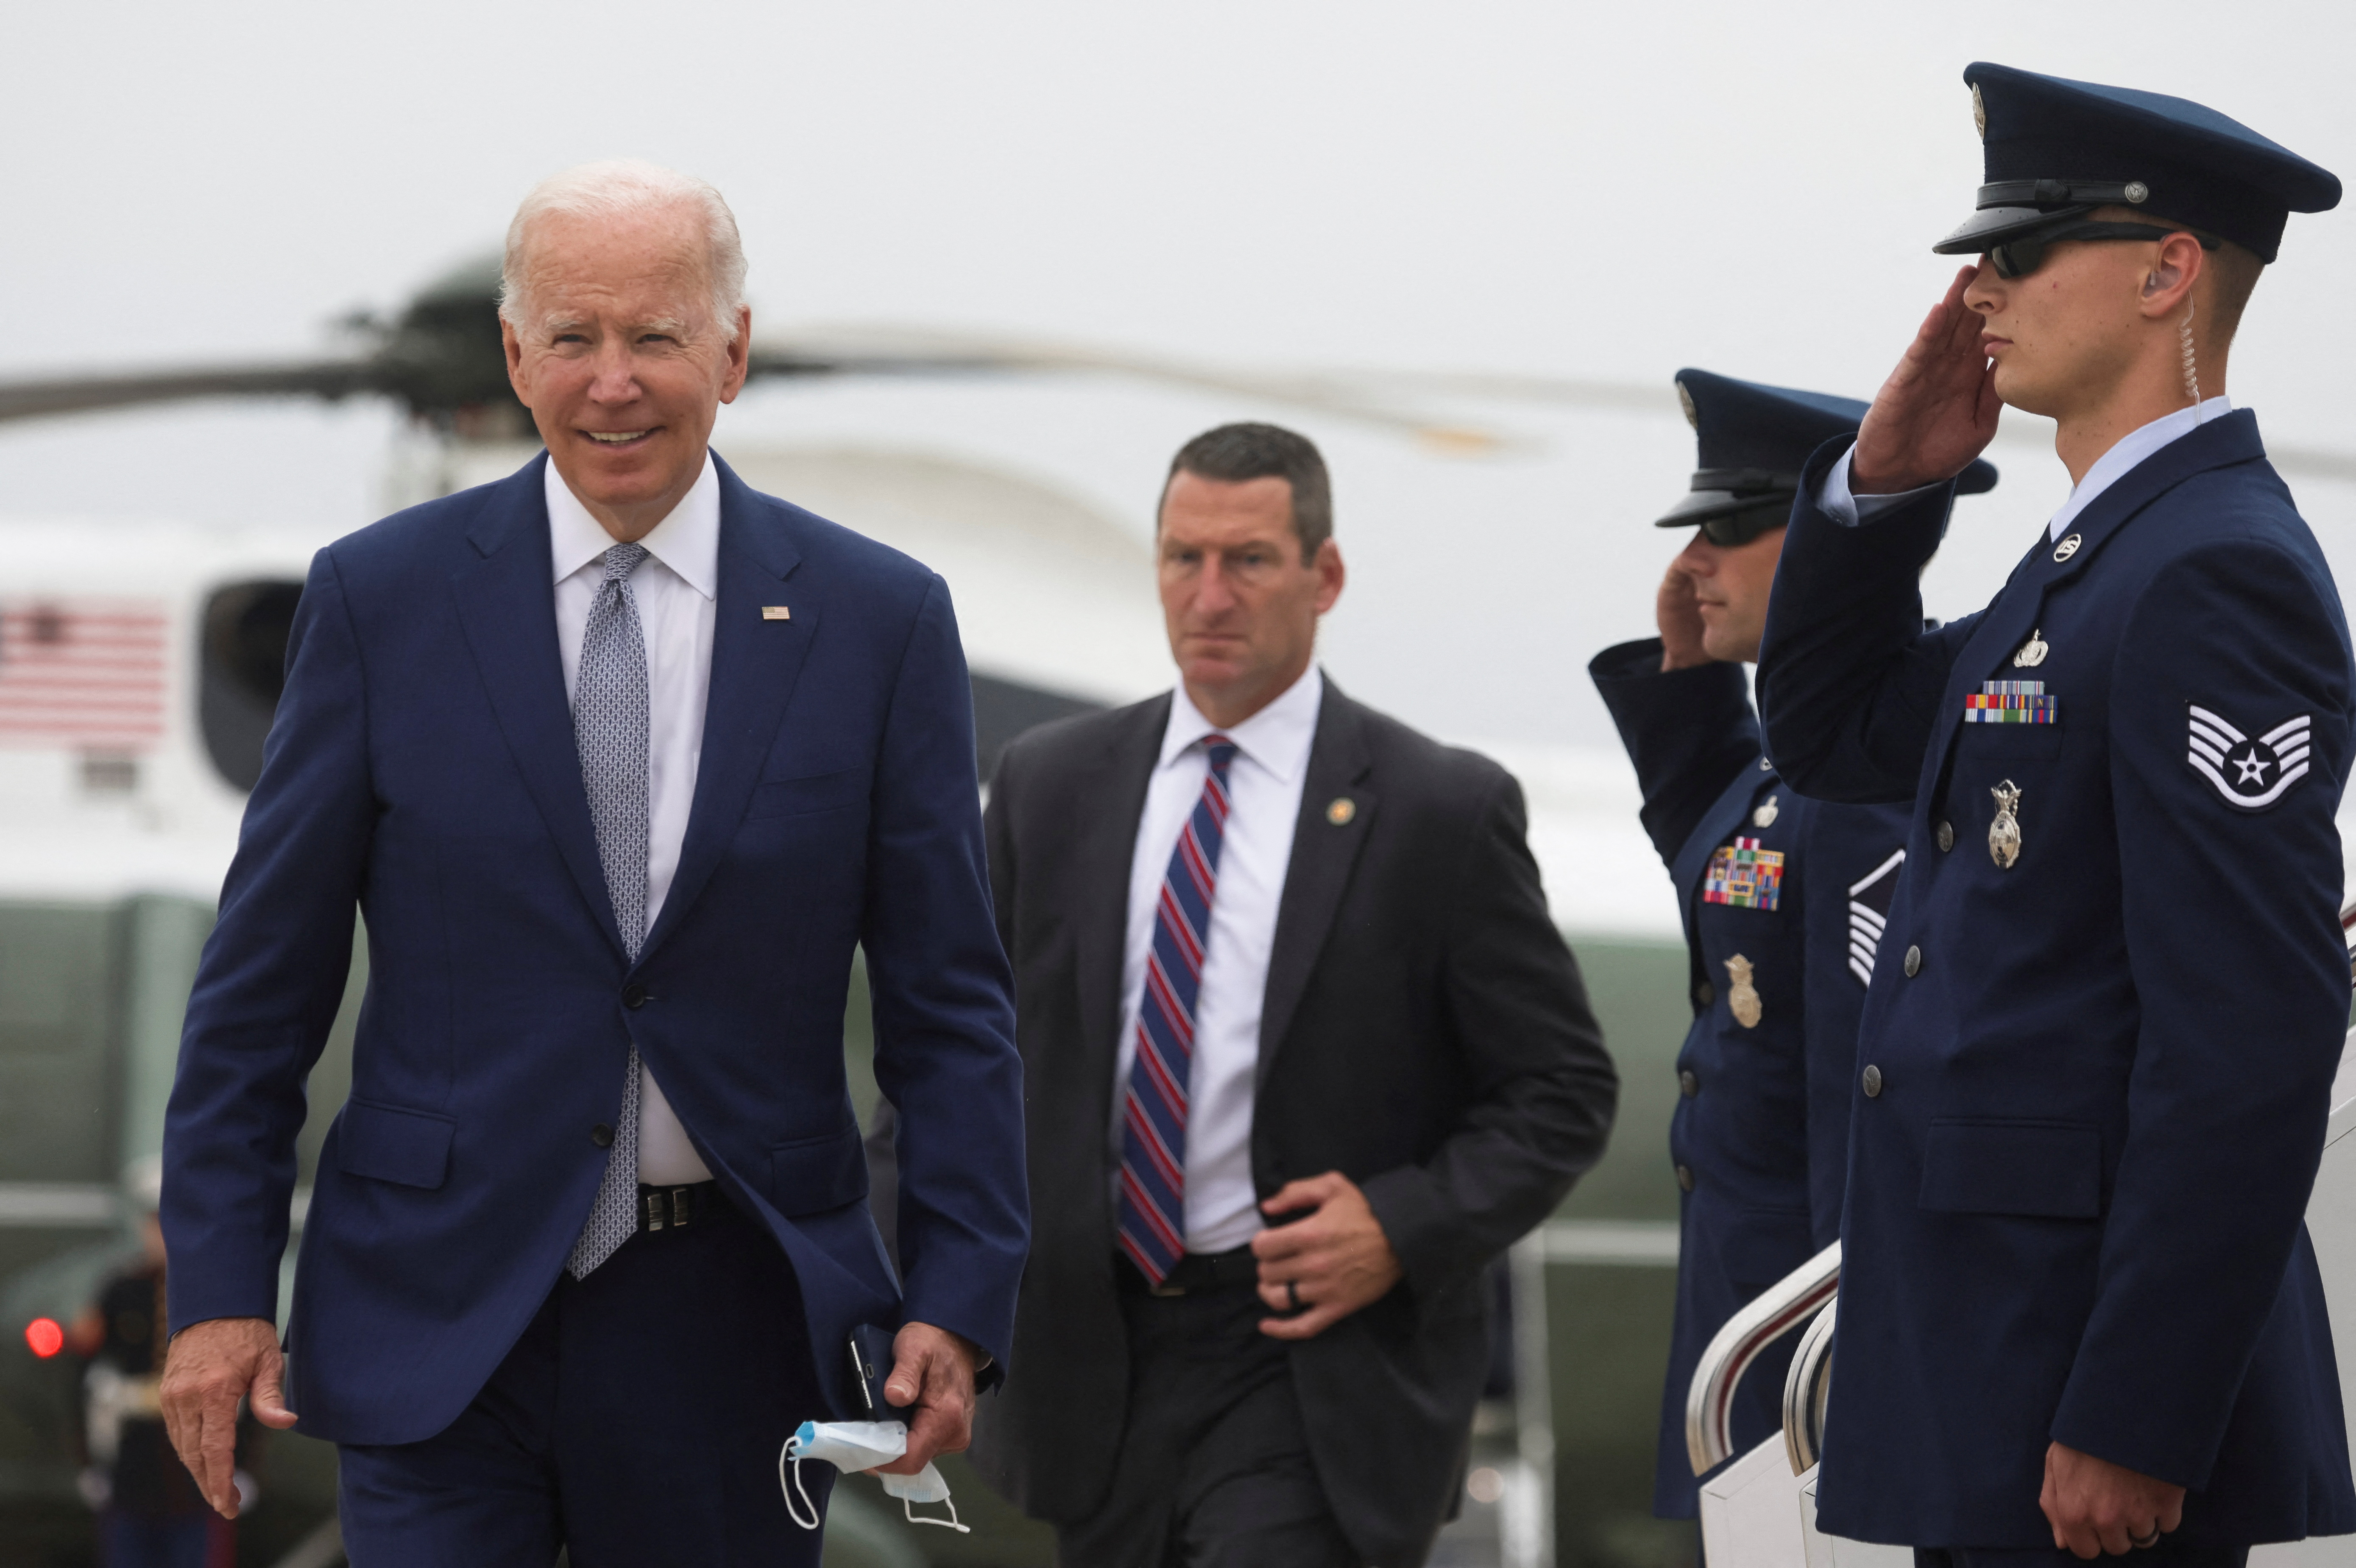 U.S. President Biden boards Air Force One at Joint Base Andrews